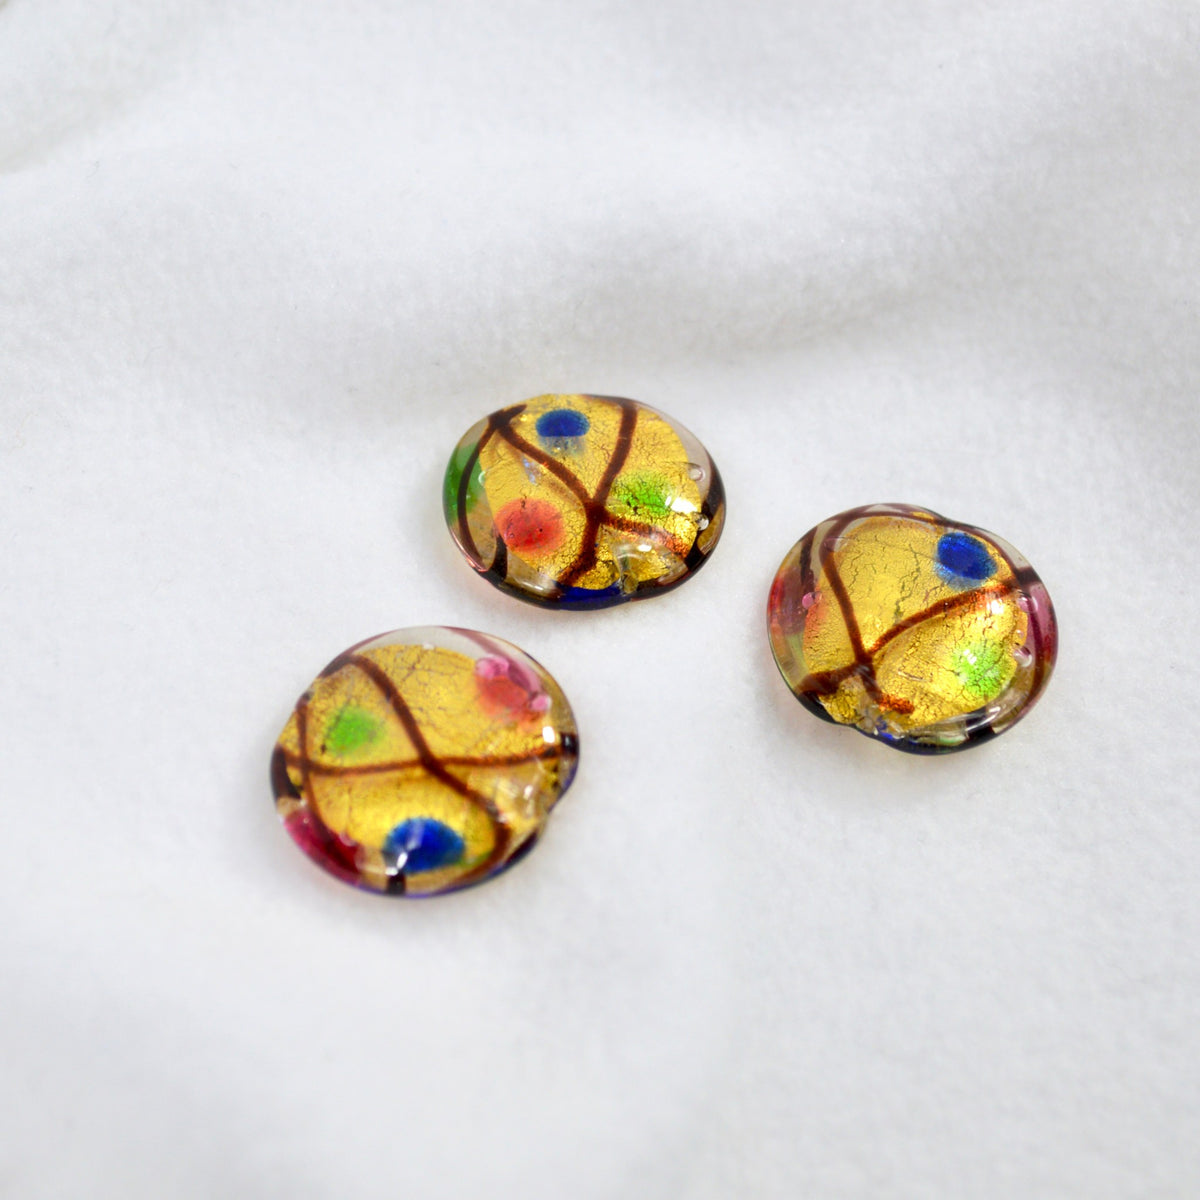 Murano Glass Beads, Gold With Polka Dots, Set of 3, Made in Italy - My Italian Decor